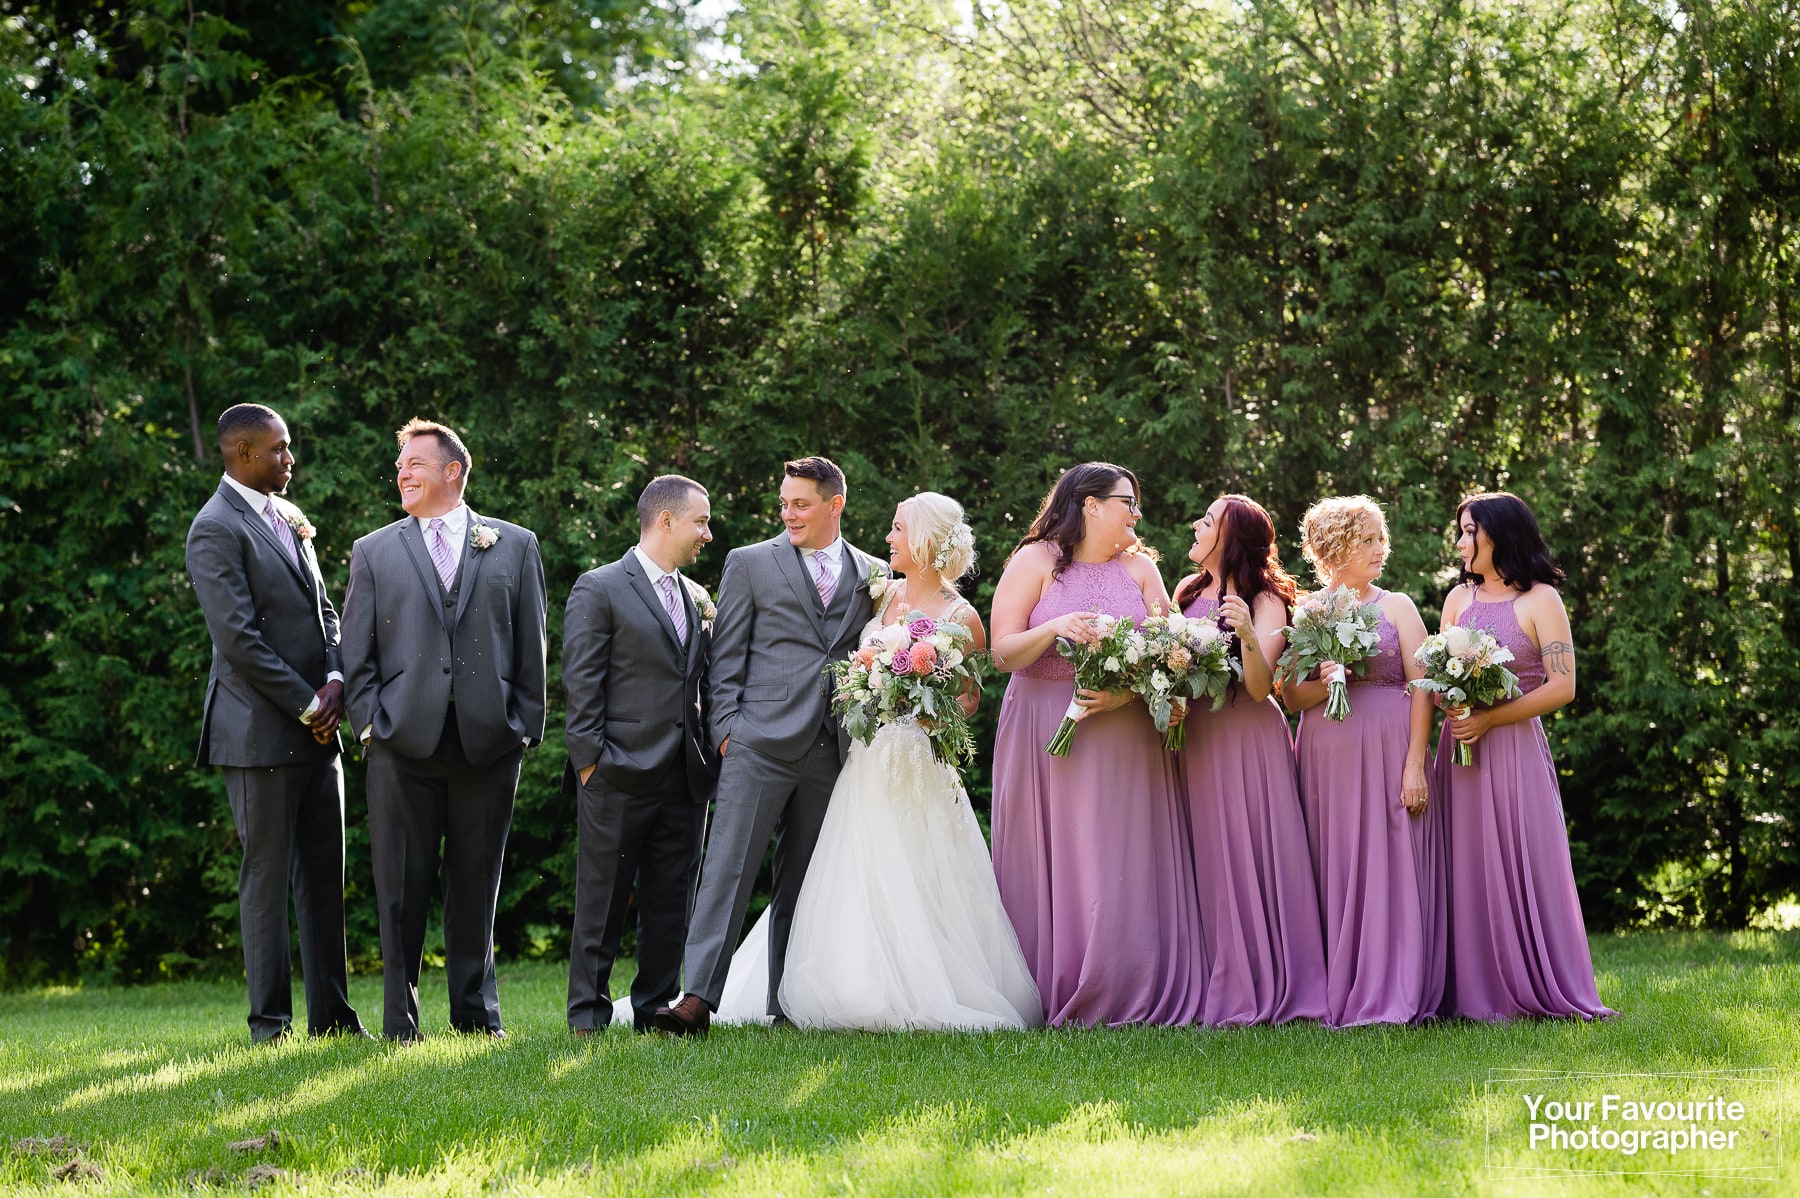 Candid group photo of wedding party outdoors in nature